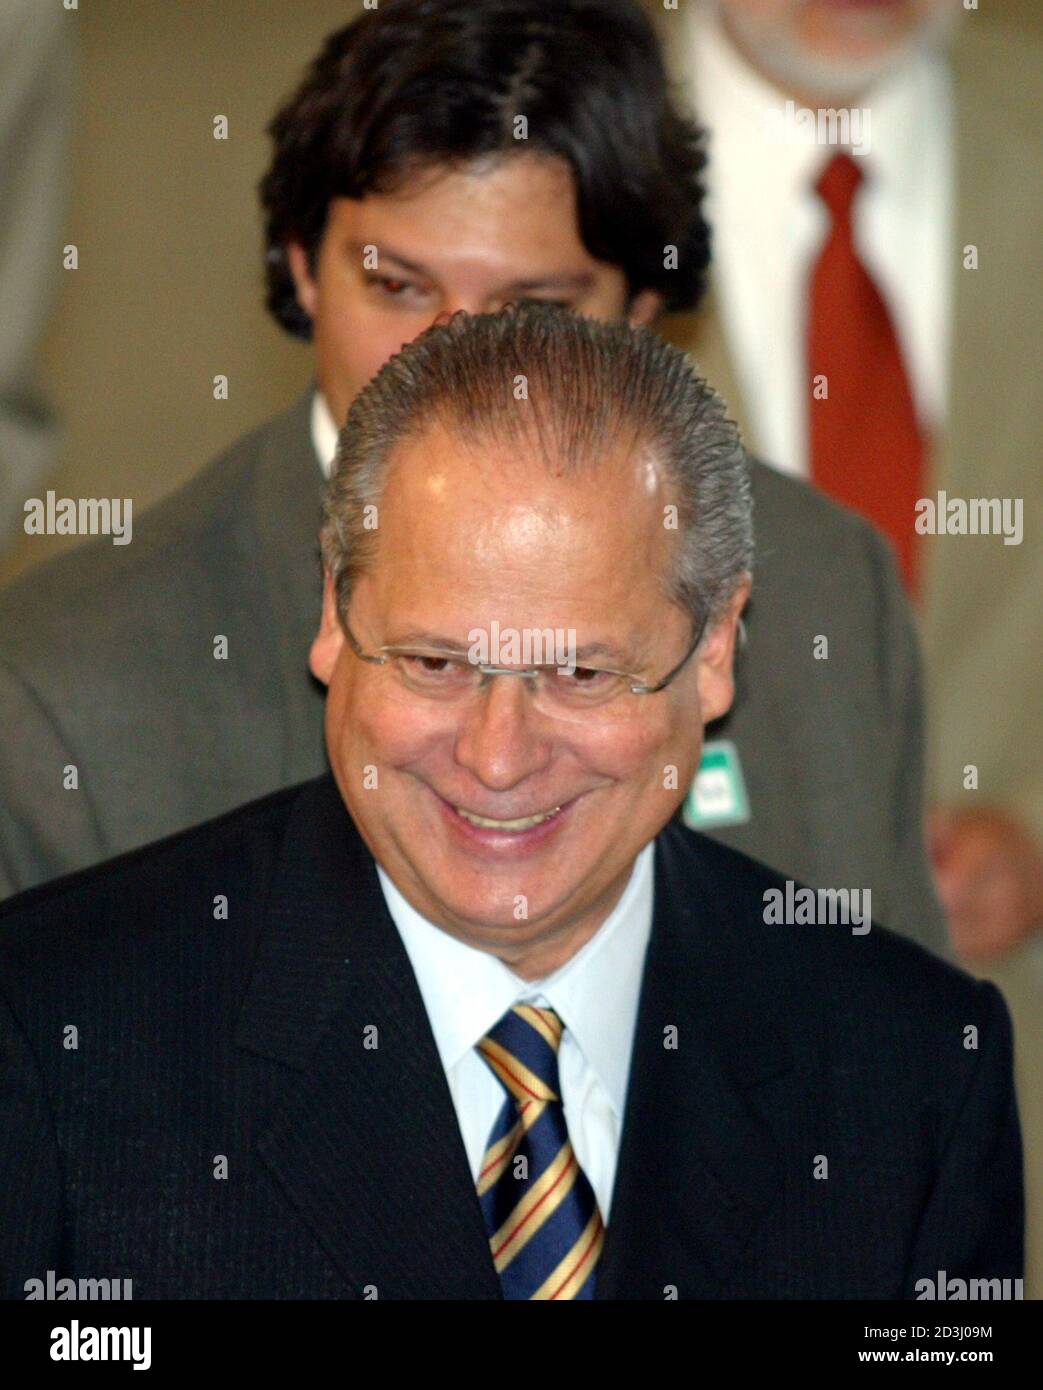 Brazil's Presidential Chief of Staff, Jose Dirceu, arrives for a ceremony at the Planalto Palace in Brasilia June 14, 2005. Dirceu, under pressure from allegations he was aware of a vote-buying scheme in Congress, agreed with President Luiz Inacio Lula da Silva to step down as his chief advisor and return to the lower house of Congress. REUTERS/Jamil Bittar   JB/KS Stock Photo